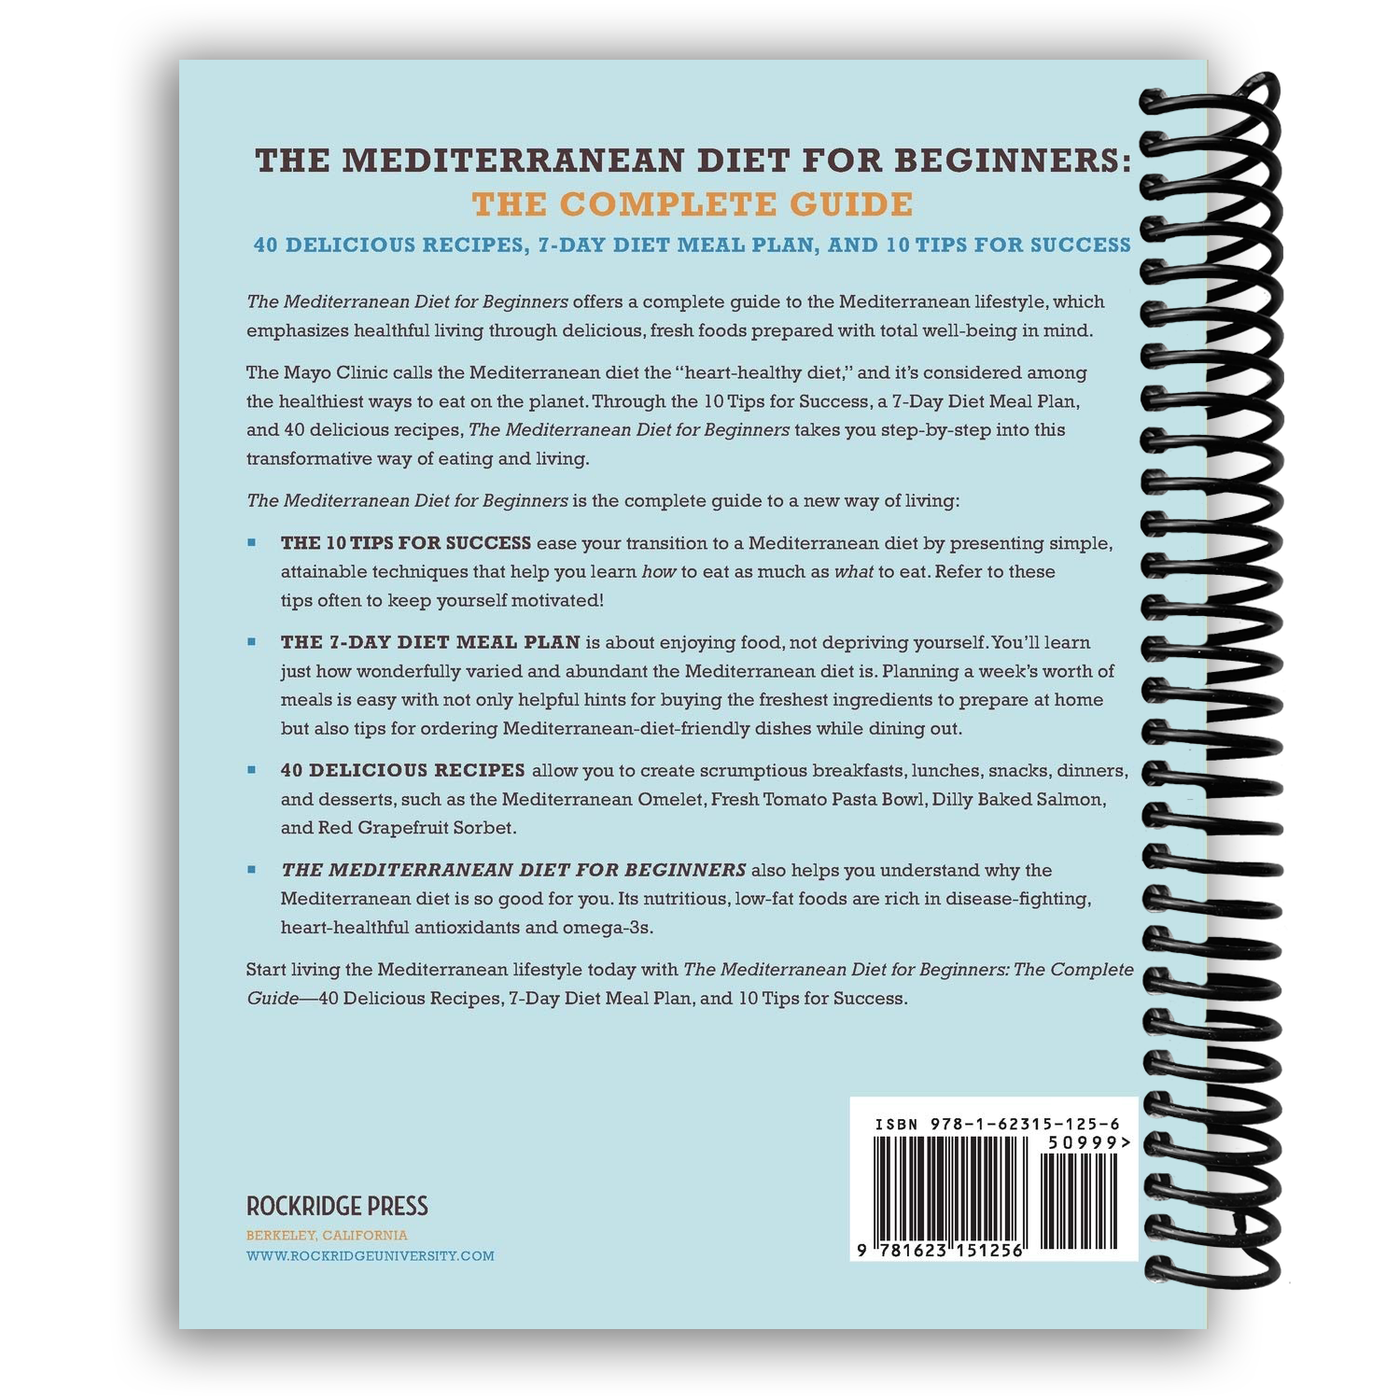 Back Cover of The Mediterranean Diet for Beginners: The Complete Guide